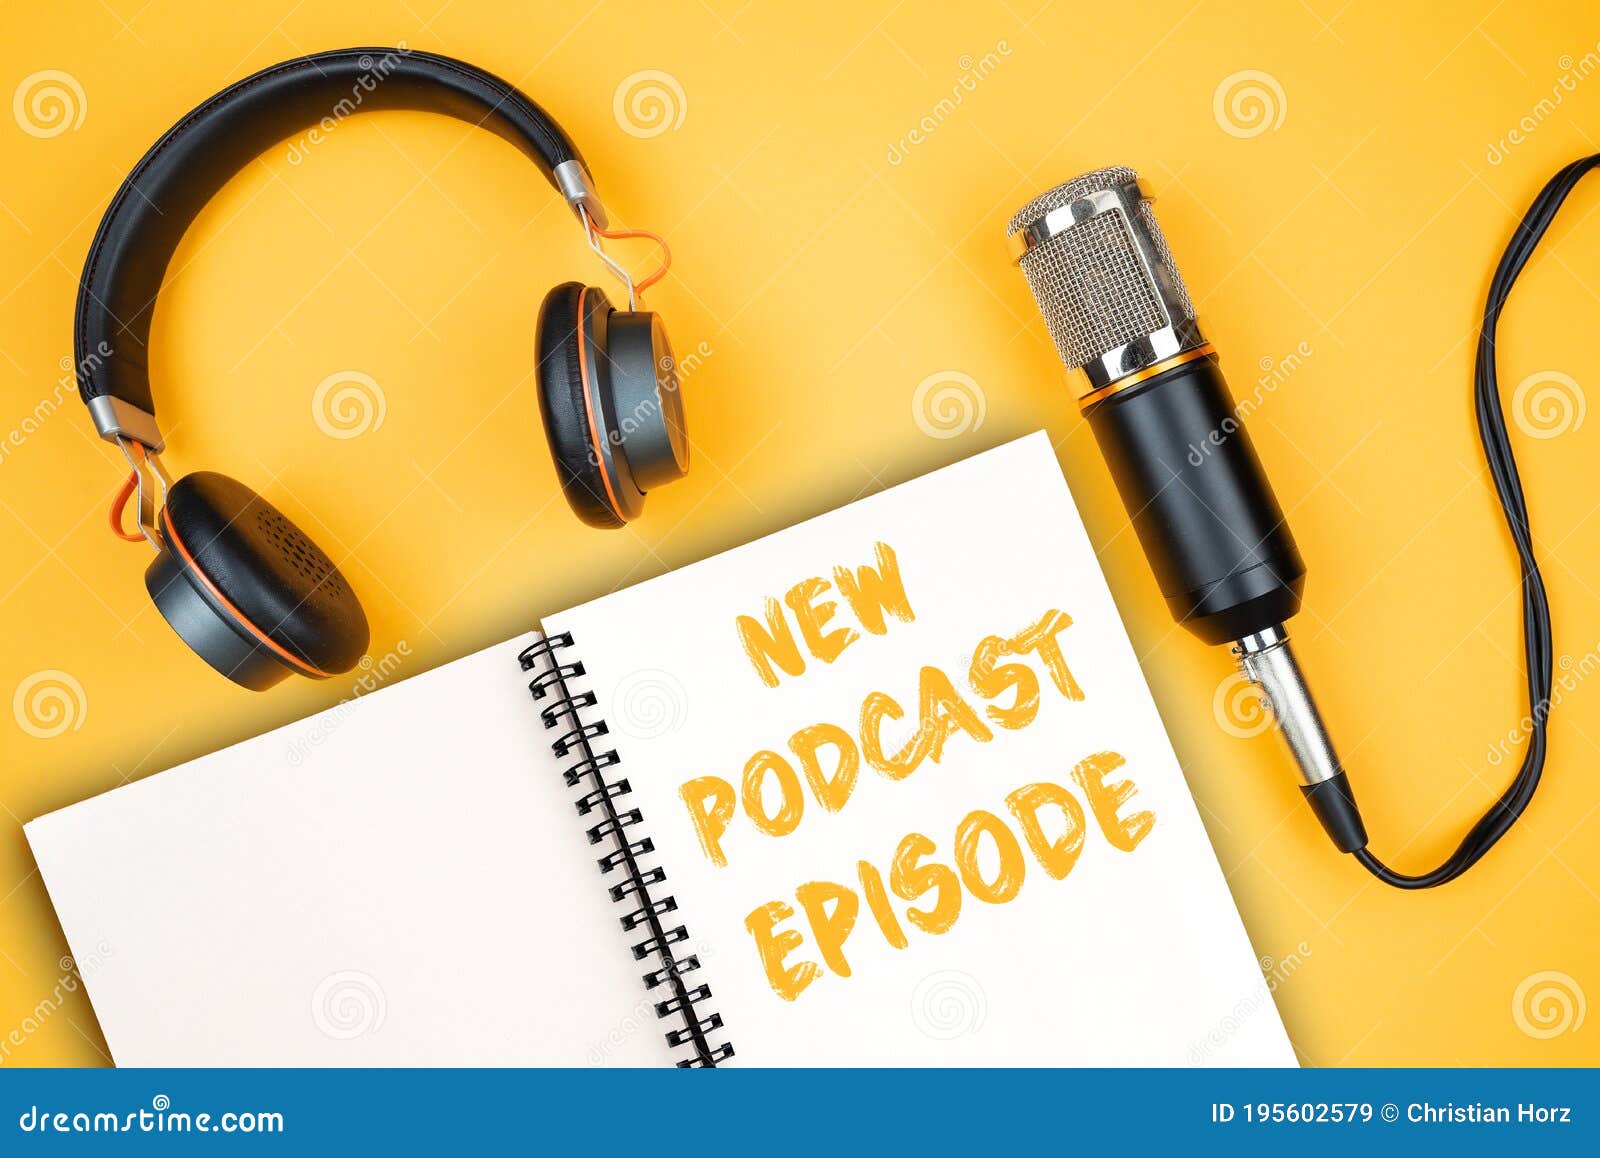 new podcast episode text on notepad next to headphones and recording microphone